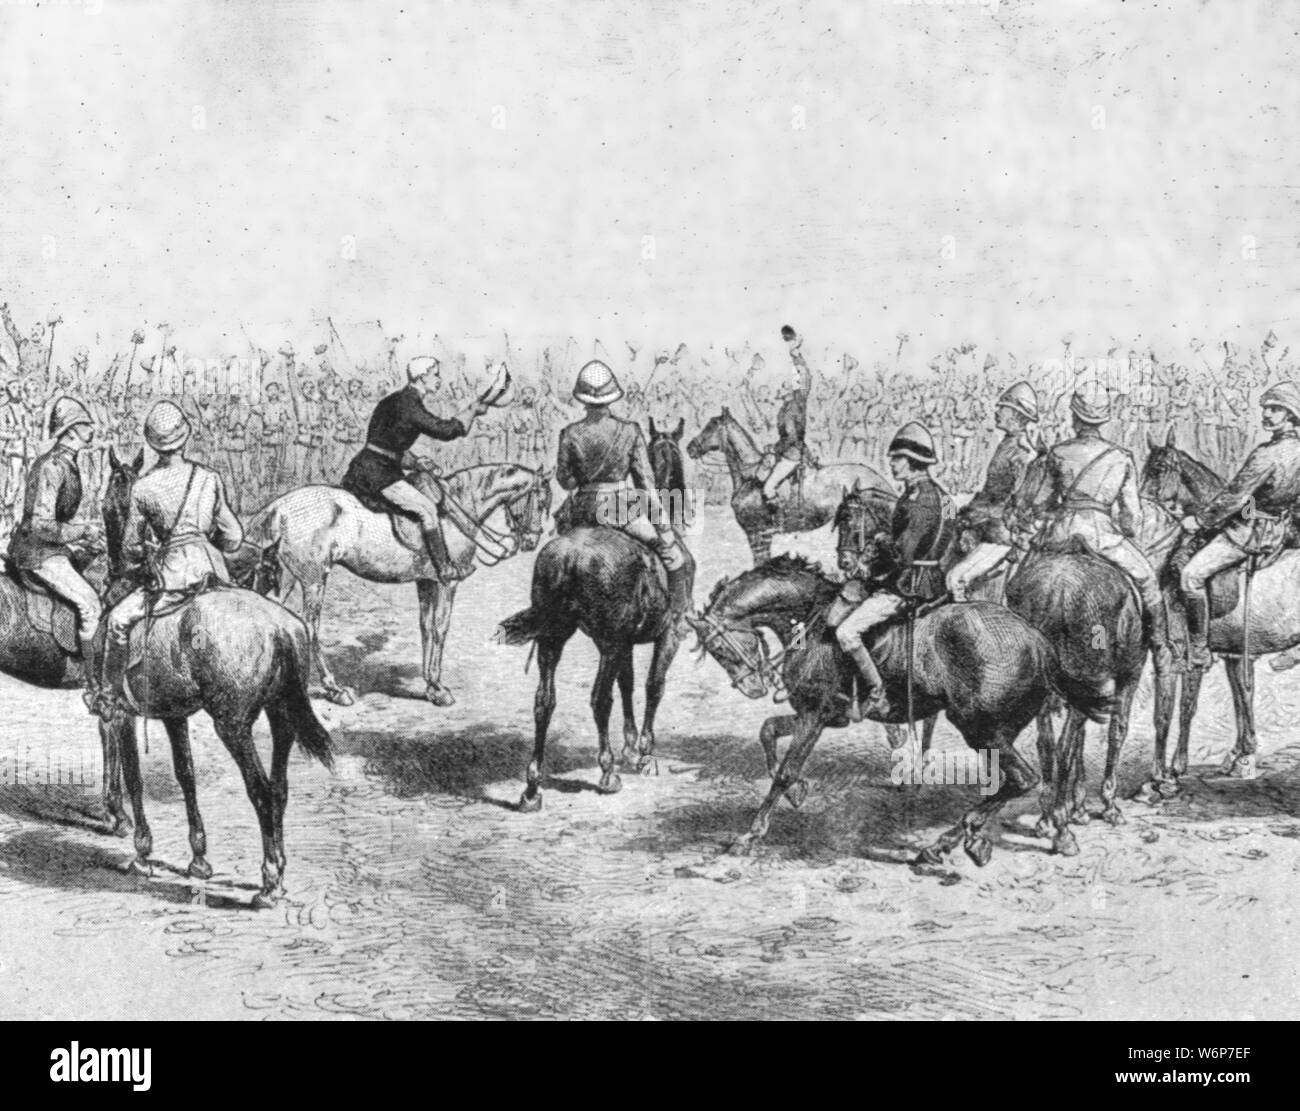 'Colonial Troops in the Soudan, 1883-85: Lord Wolseley Bidding Farewell to the Australian Infantry at the End of the Campaign', (1901). The Mahdist War (1881-1899) was fought between British forces and the Mahdist Sudanese army in the Sudan, east Africa. From &quot;The Illustrated London News Record of the Glorious Reign of Queen Victoria 1837-1901: The Life and Accession of King Edward VII. and the Life of Queen Alexandra&quot;. [London, 1901] Stock Photo